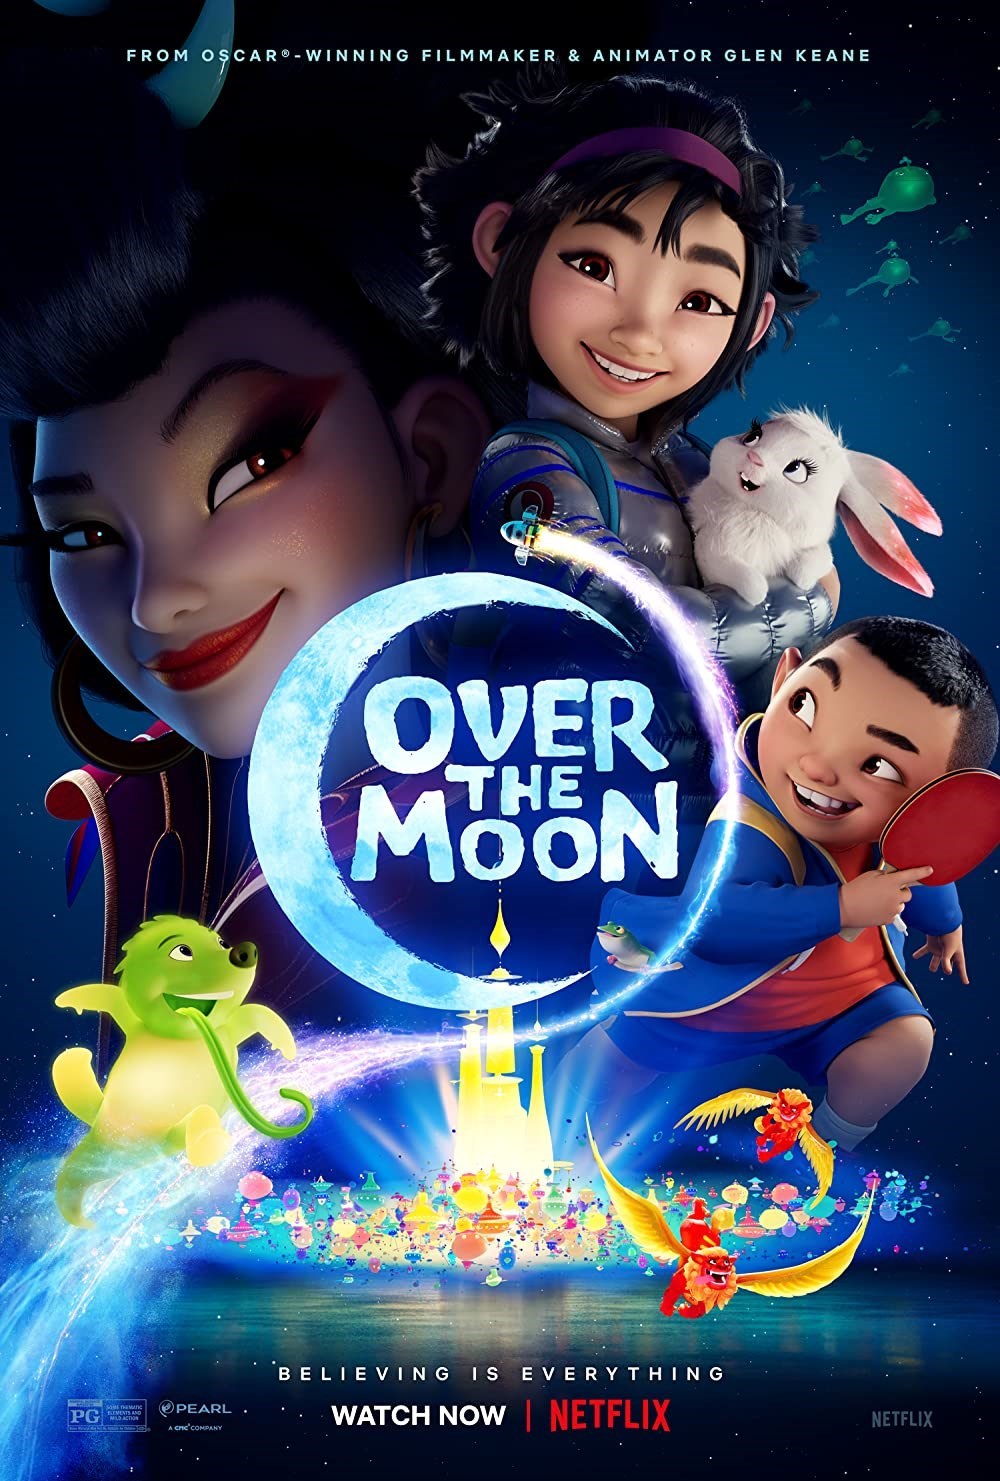 Over the moon (2020)